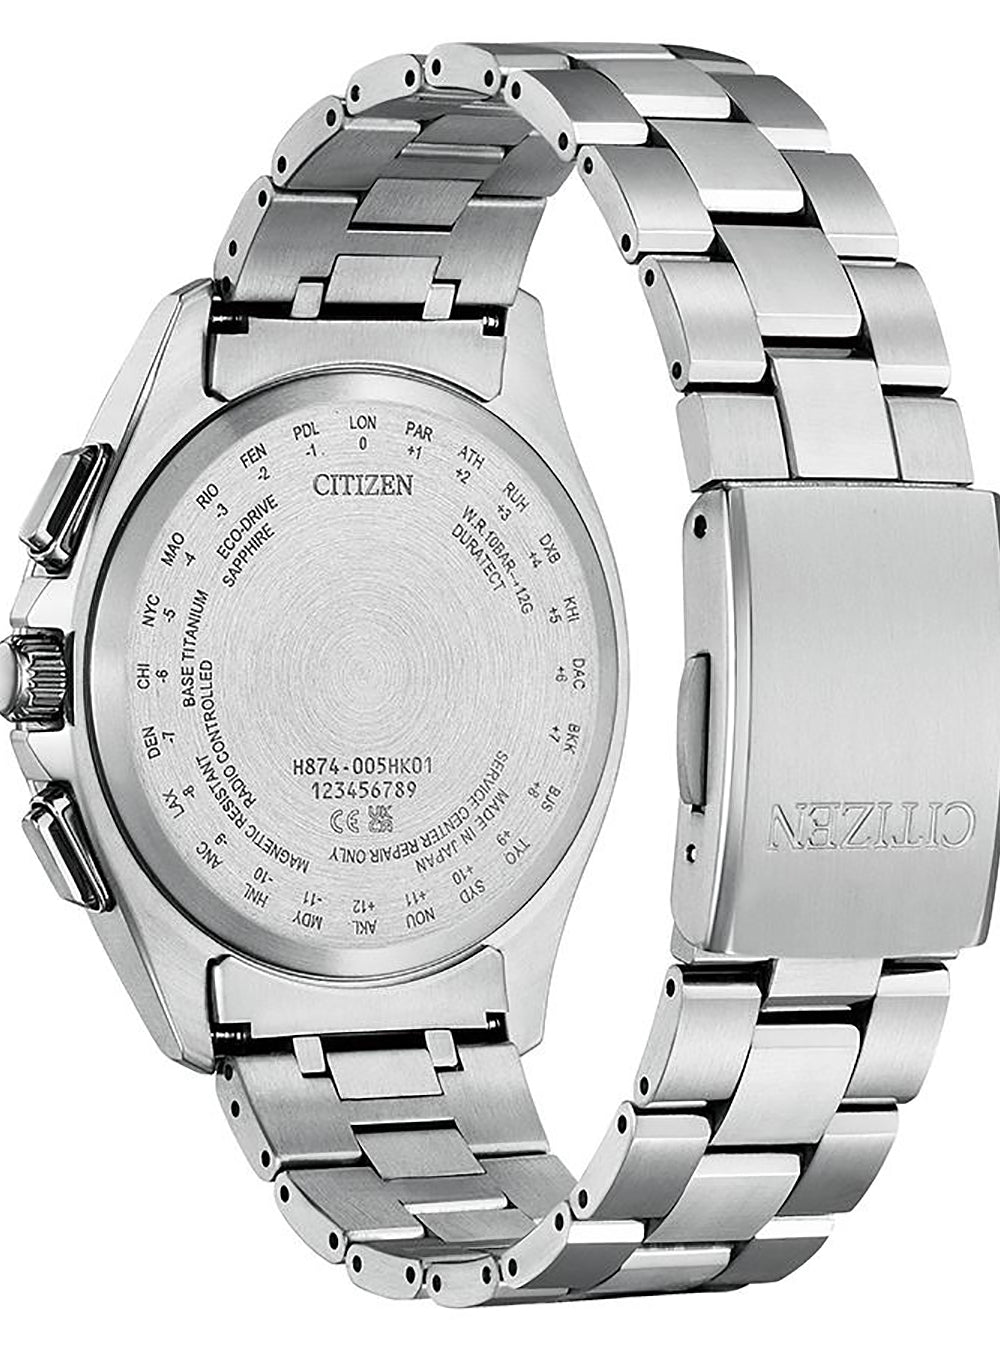 CITIZEN ATTESA BY1001-66E MADE IN JAPAN JDMWRISTWATCHjapan-select